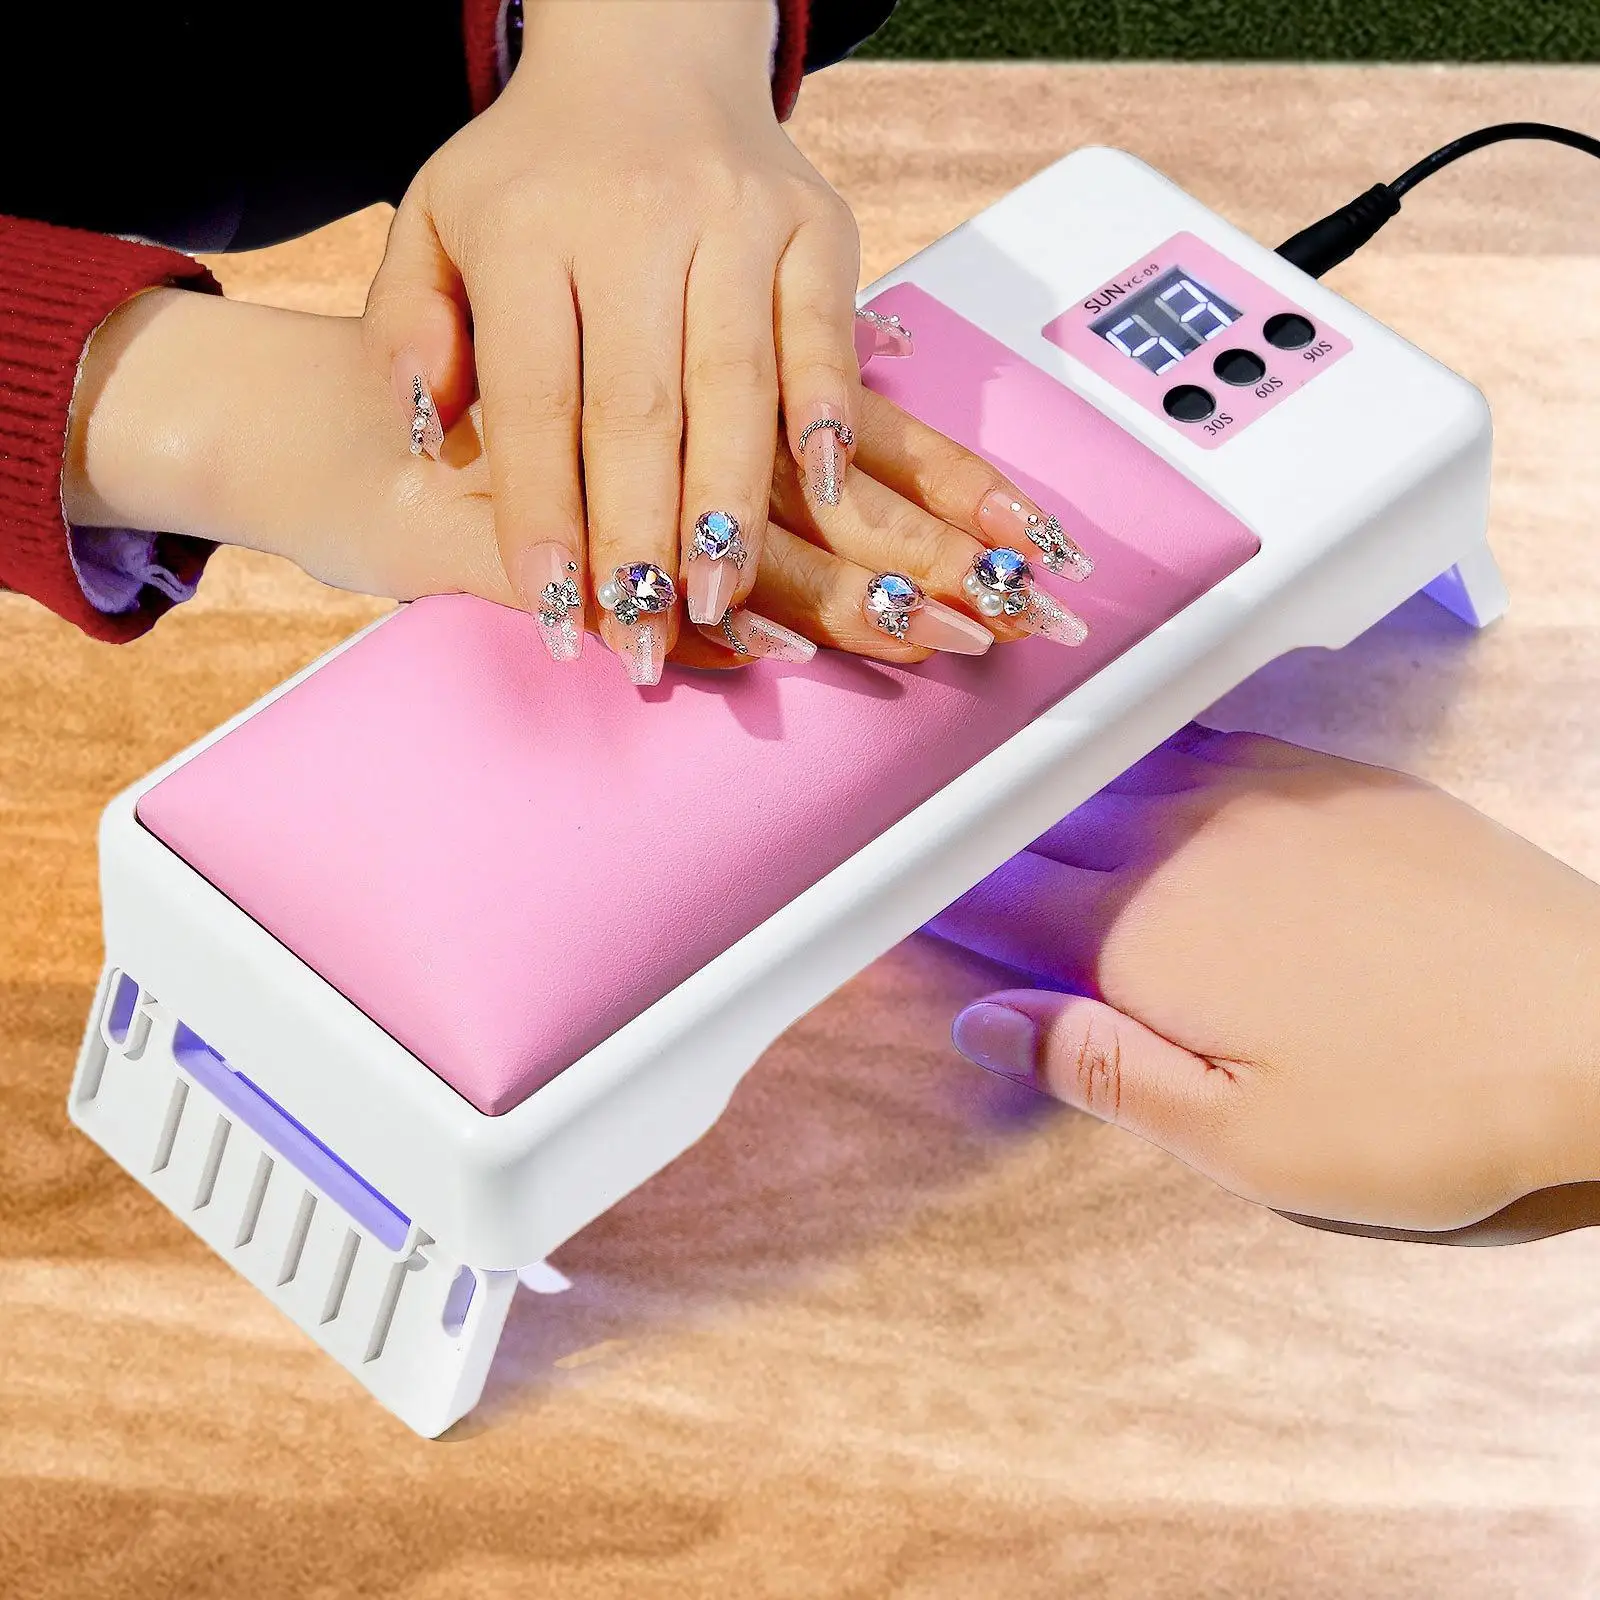 Multifunction Nail Arm Rest with LED Nail Lamp Nail Light Manicure Tool 3 Timer Setting LED Display for Salon and Home Use